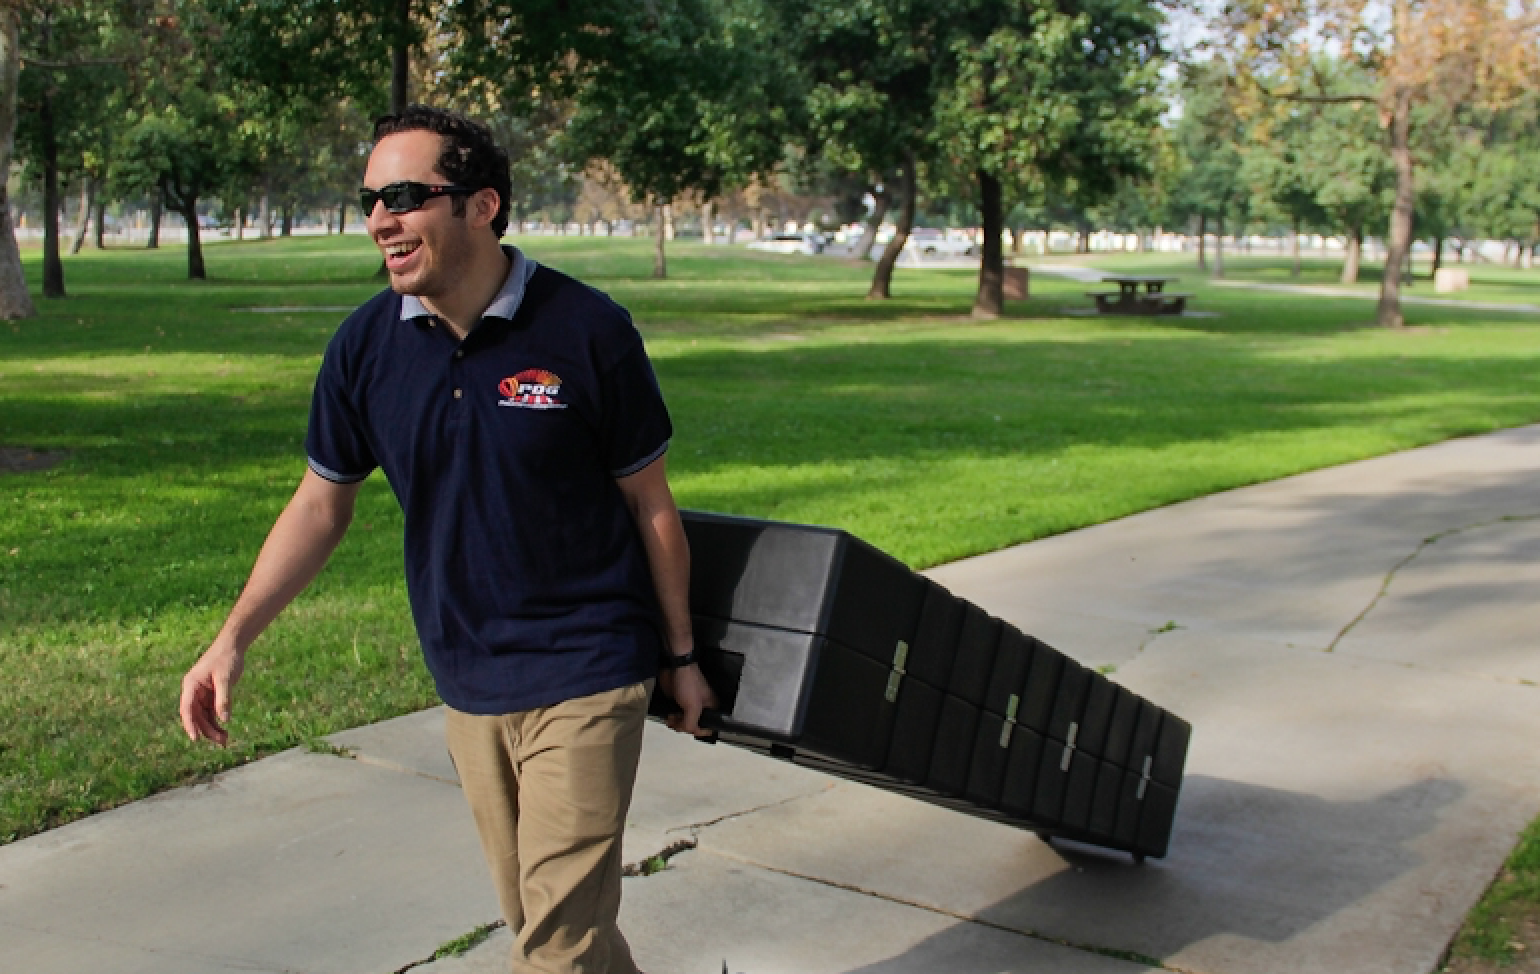 Human pulling a Rhino Roller Hard Case through the park while smiling and wearing sunglasses